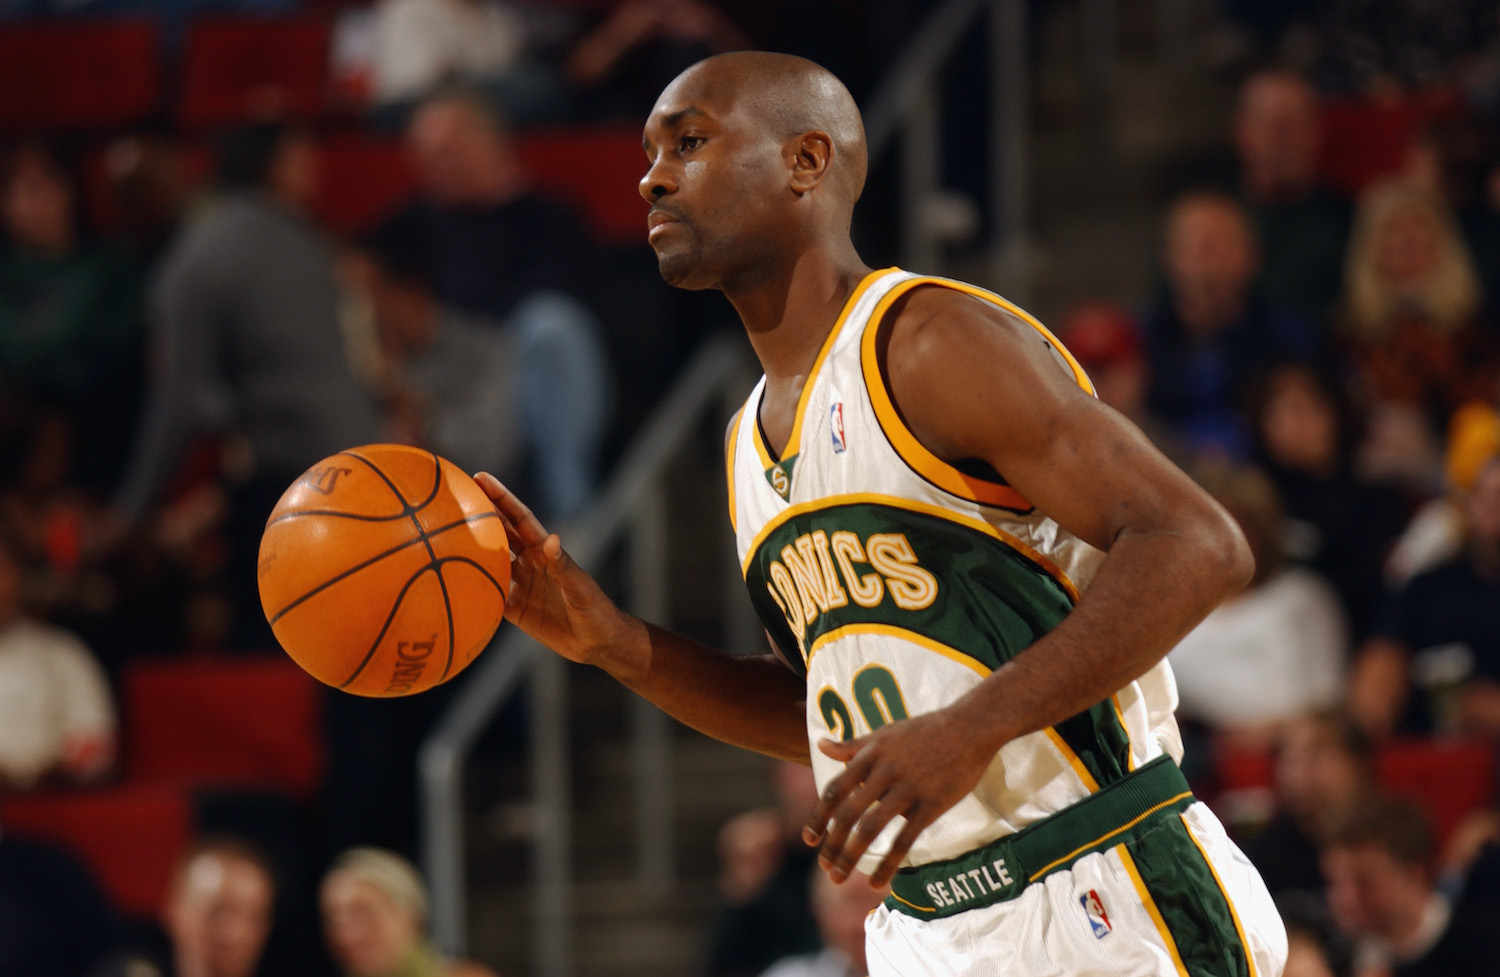 Point guard Gary Payton dribbles the ball up the court as a member of the Seattle SuperSonics.